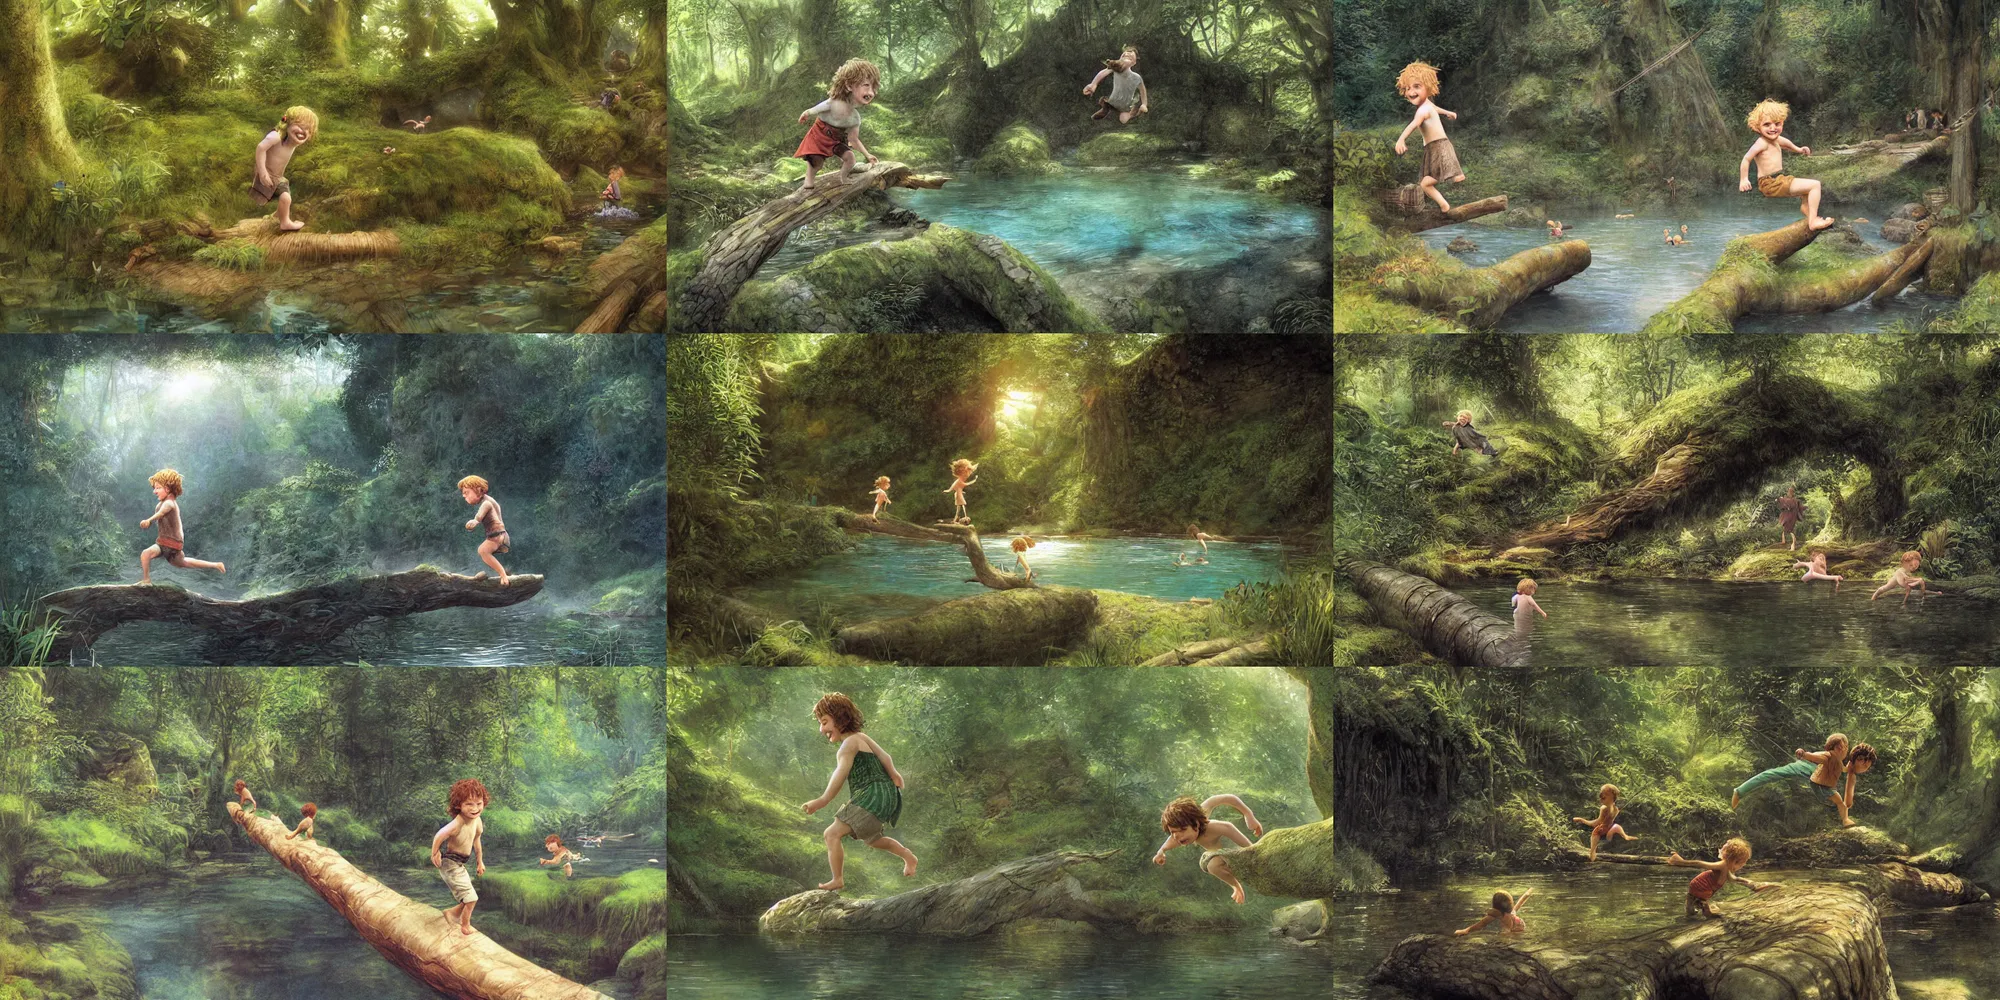 Prompt: a smiling hobbit child running up a log to leap into a crystal clear swimming hole, another hobbit child swims below, by alan lee, dark forest background, sunlight filtering through the trees, digital art, art station.